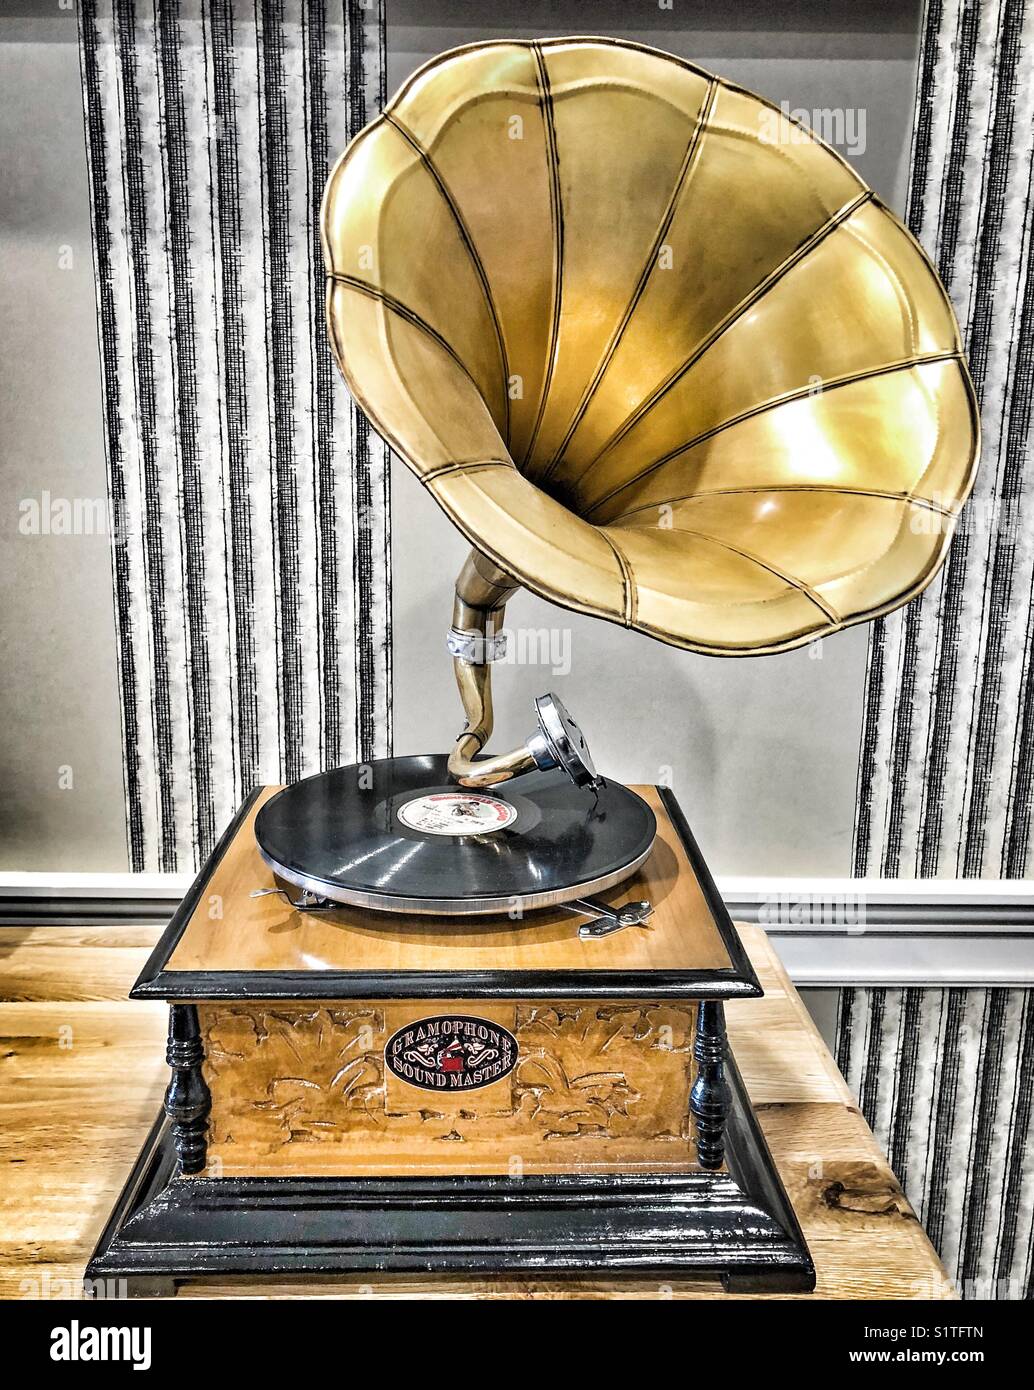 Vintage gramophone record player with horn Stock Photo - Alamy